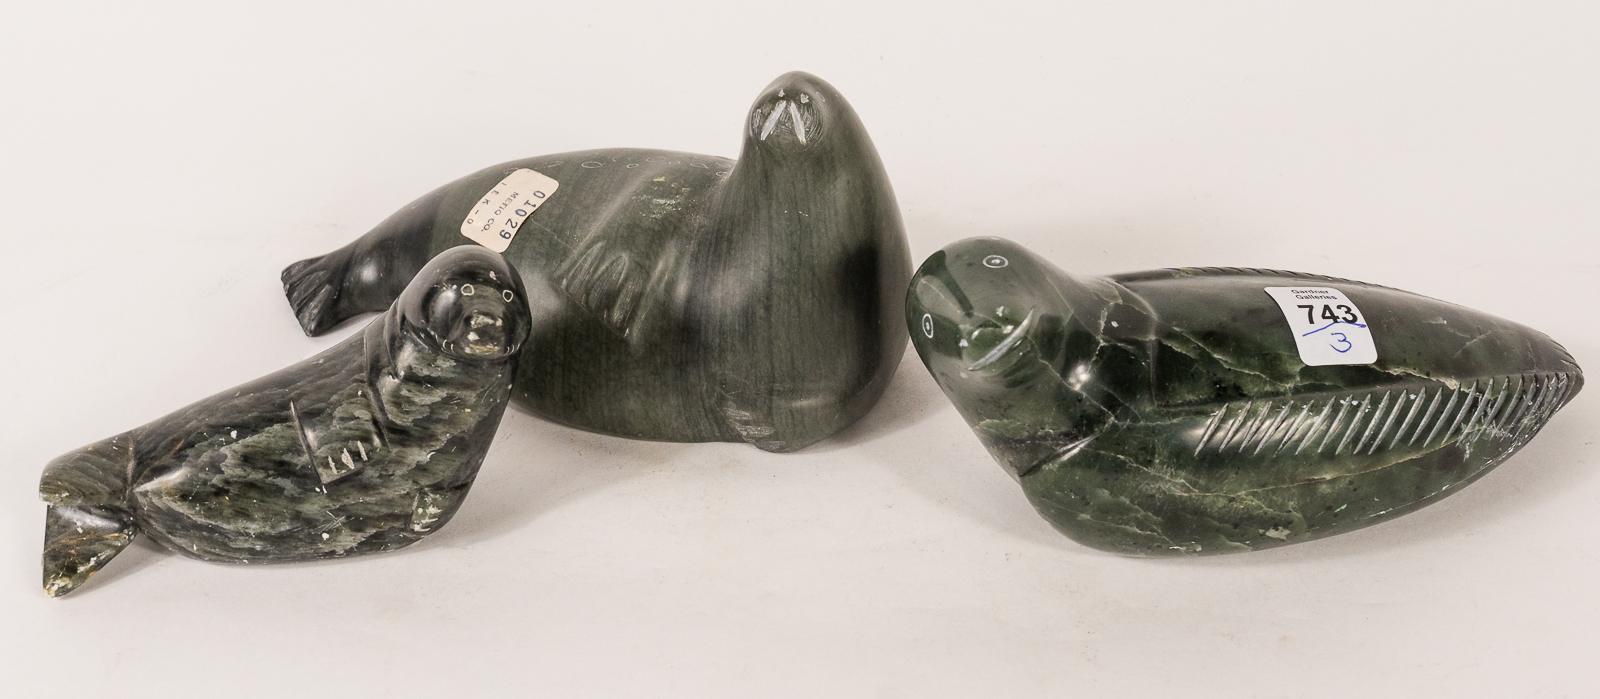 THREE INUIT SOAPSTONE "SEAL" CARVINGS